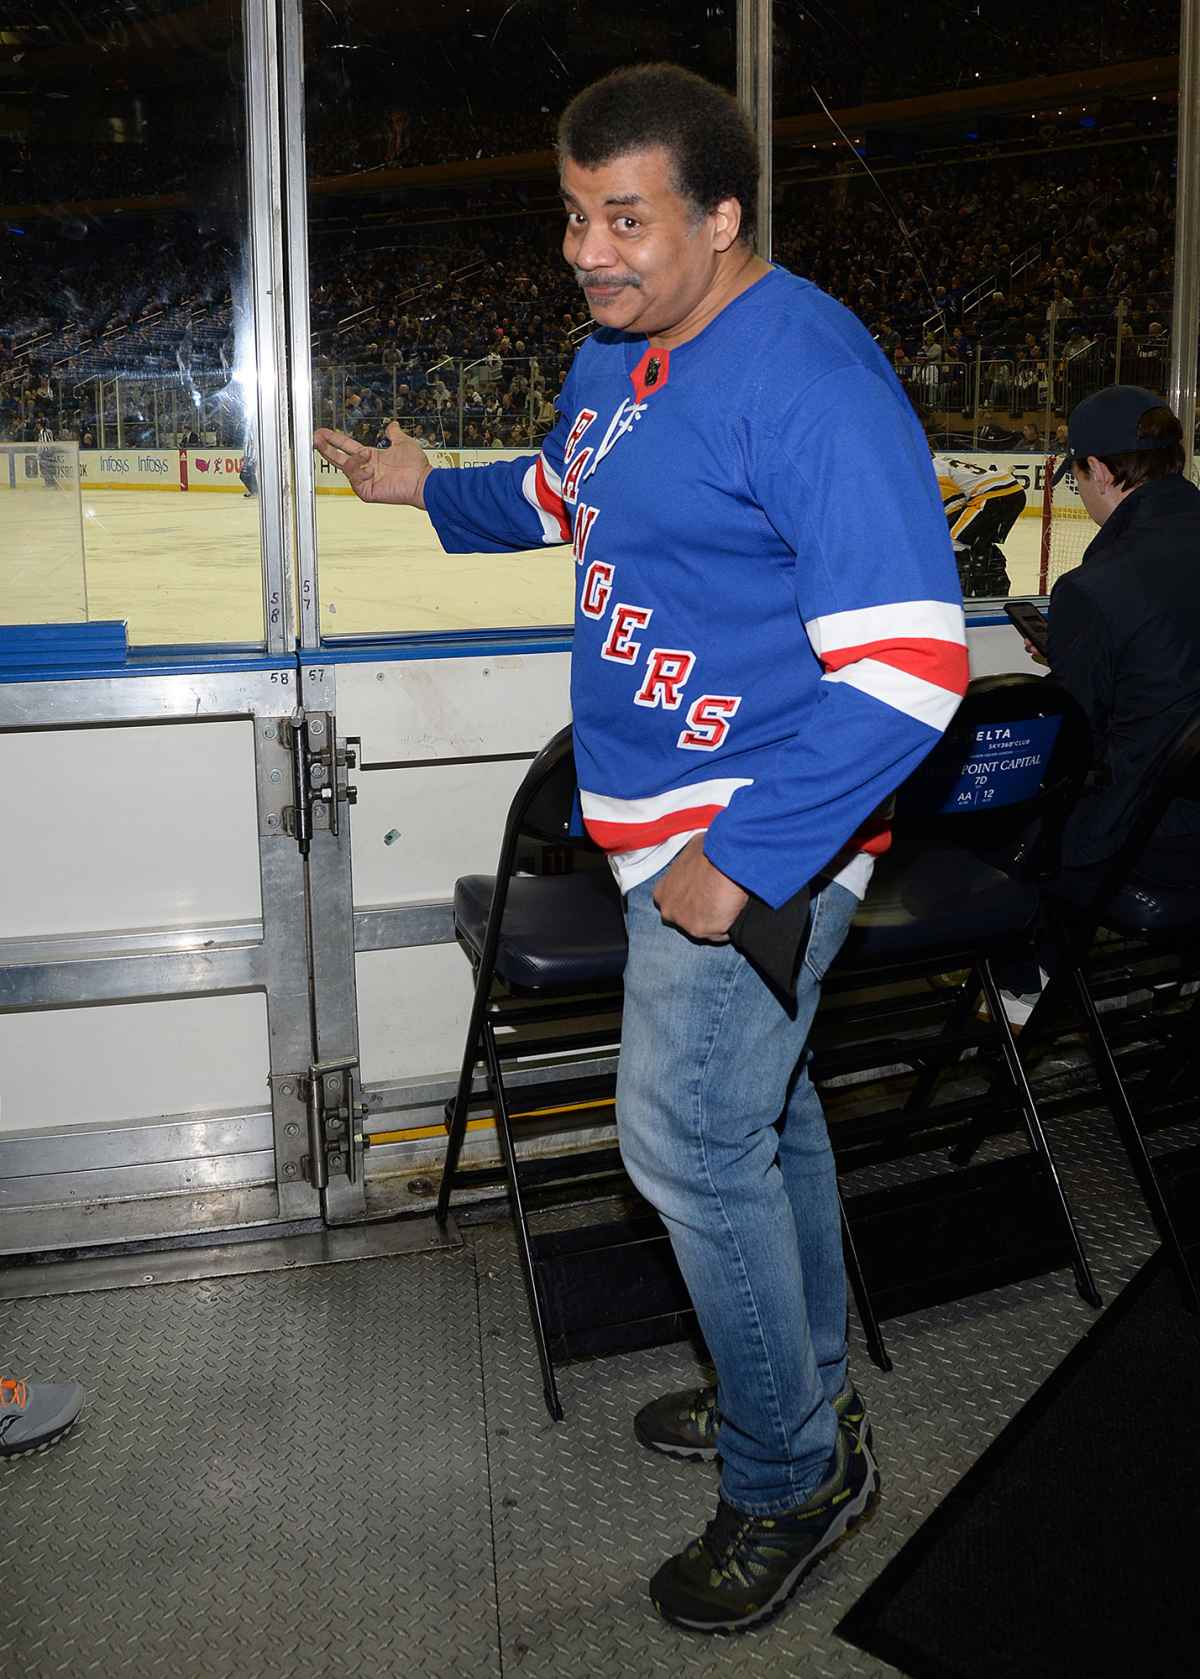 Justin Bieber in the New York Rangers Jersey